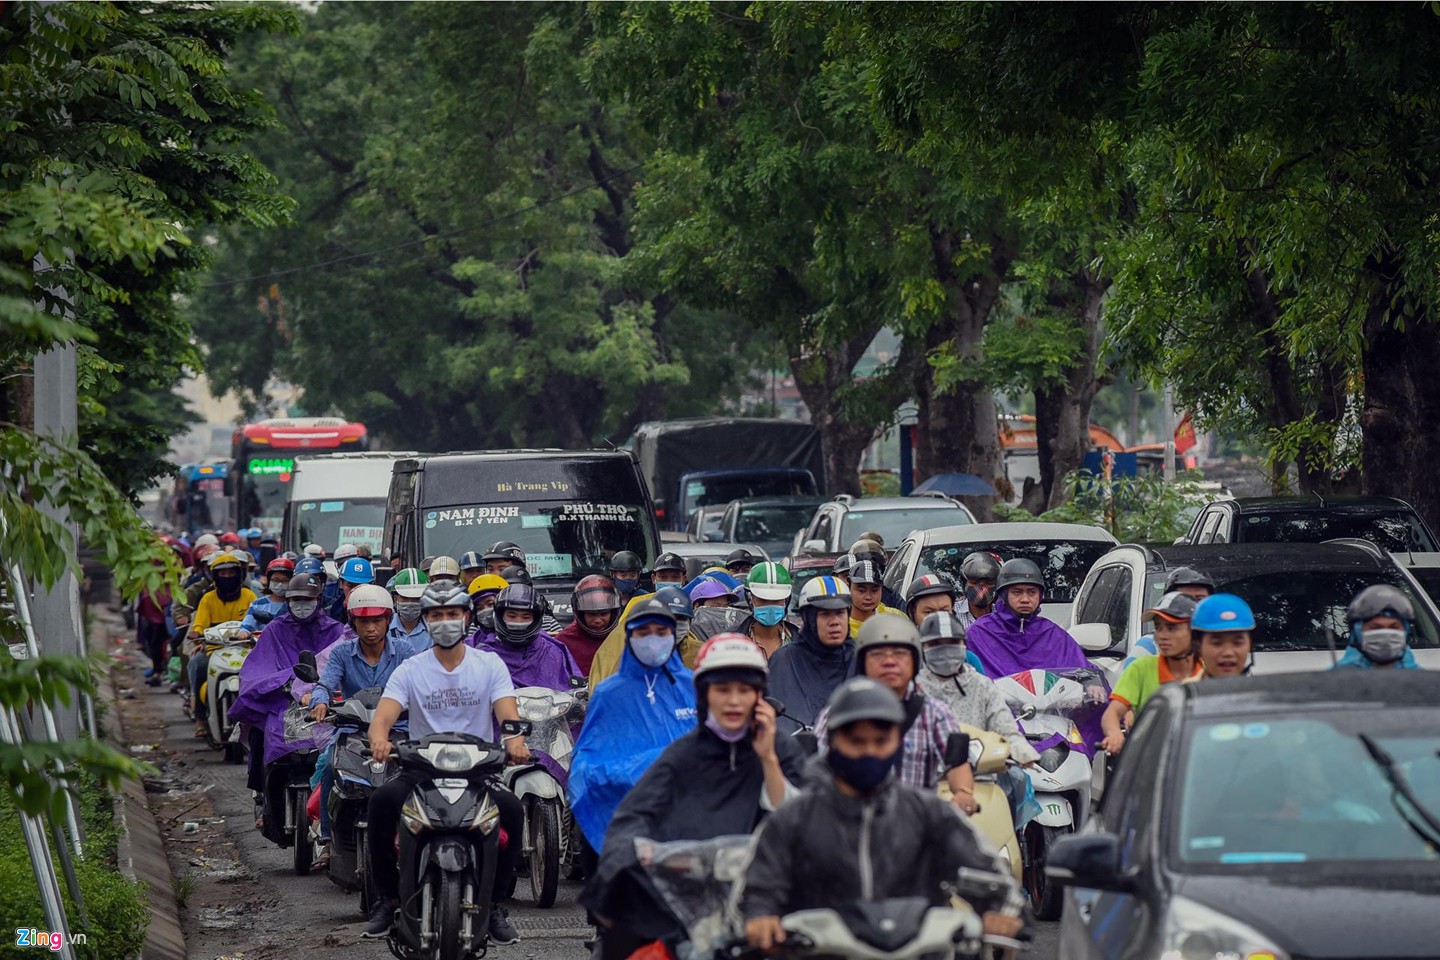 Despite continuous expansion, the Western area’s infrastructure, typically roads like Ho Tung Mau, Pham Van Dong often sees overload, with traffic congestion, flood, environment pollution.